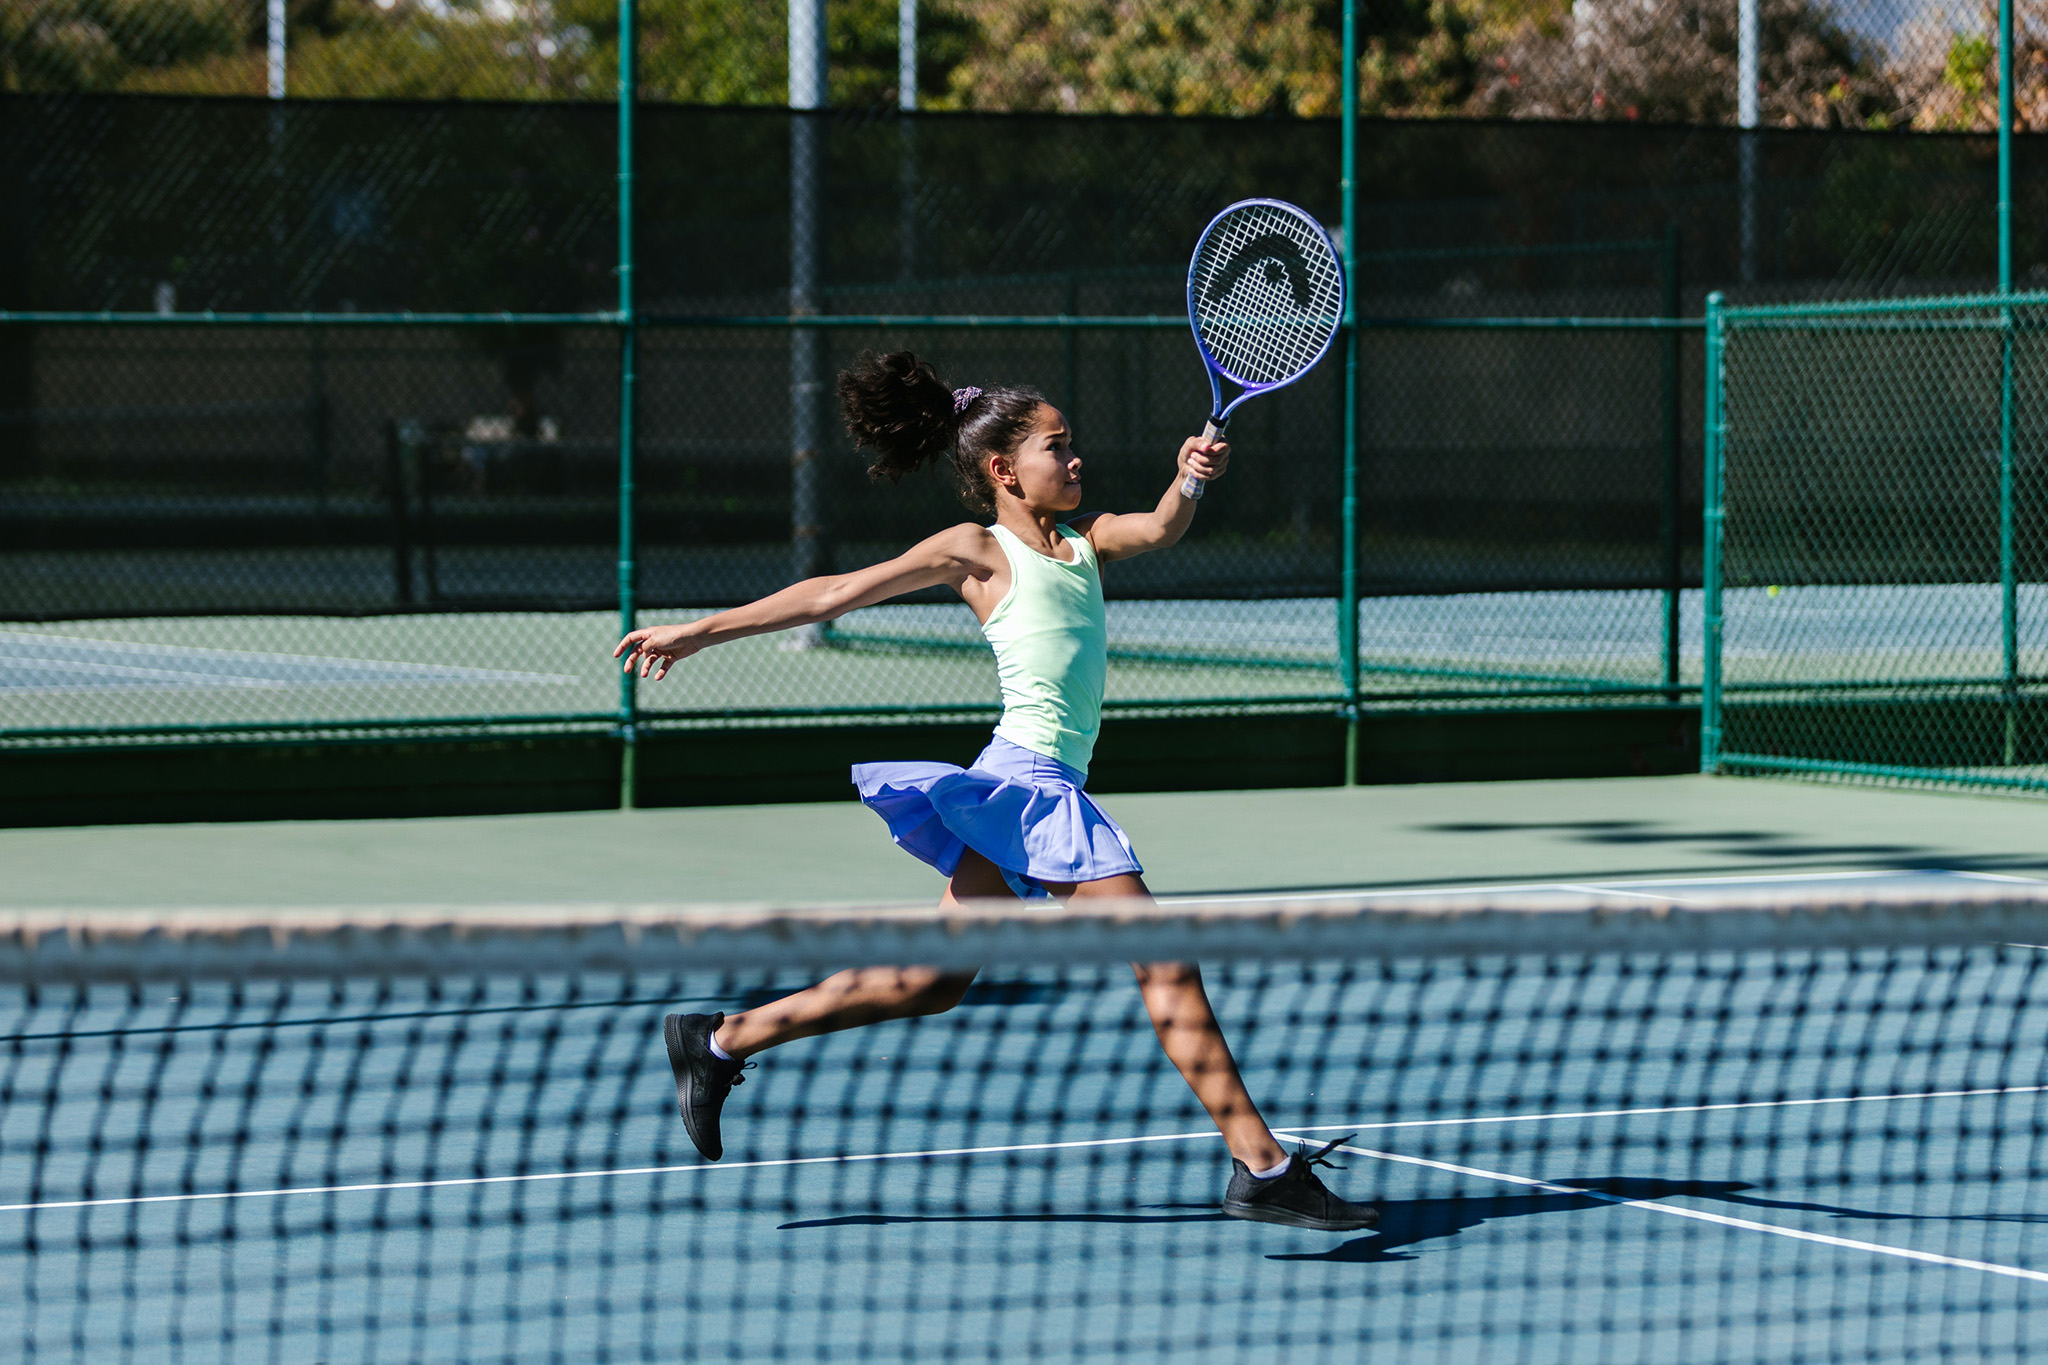 An action photo of a young girl swinging a tennis racket